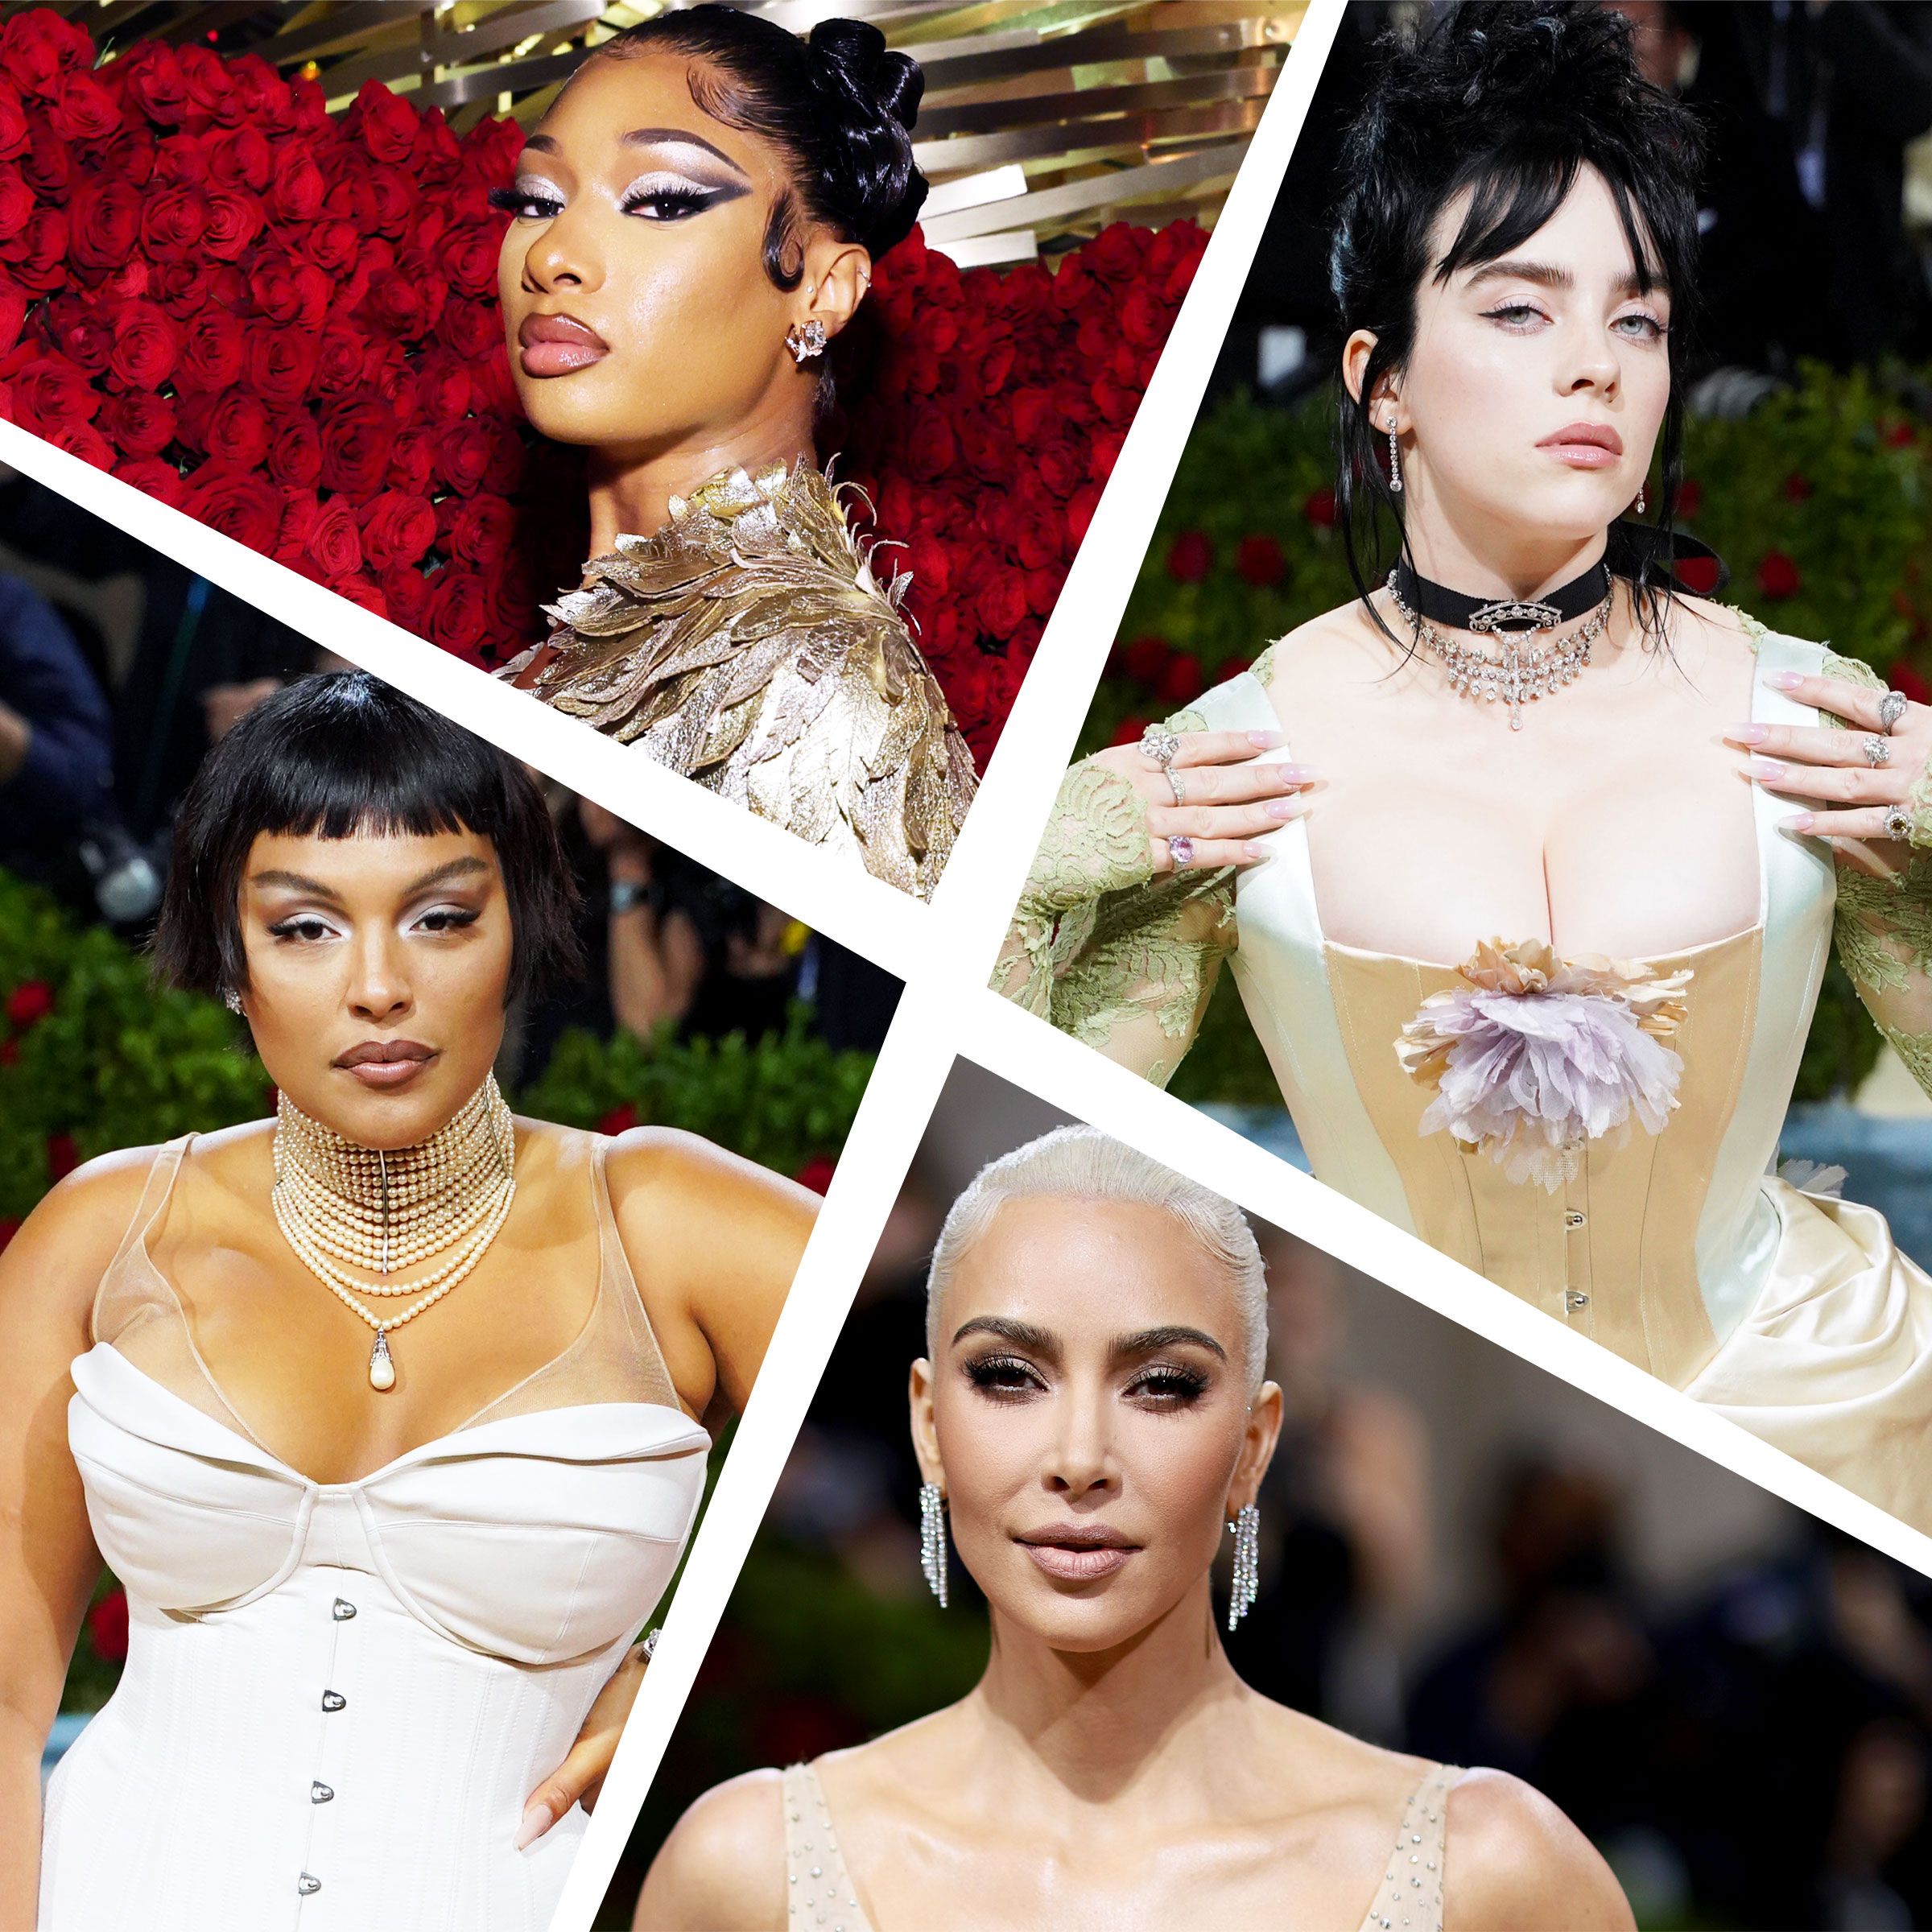 Cheat sheet: Everything you need to know about the 2023 Met Gala